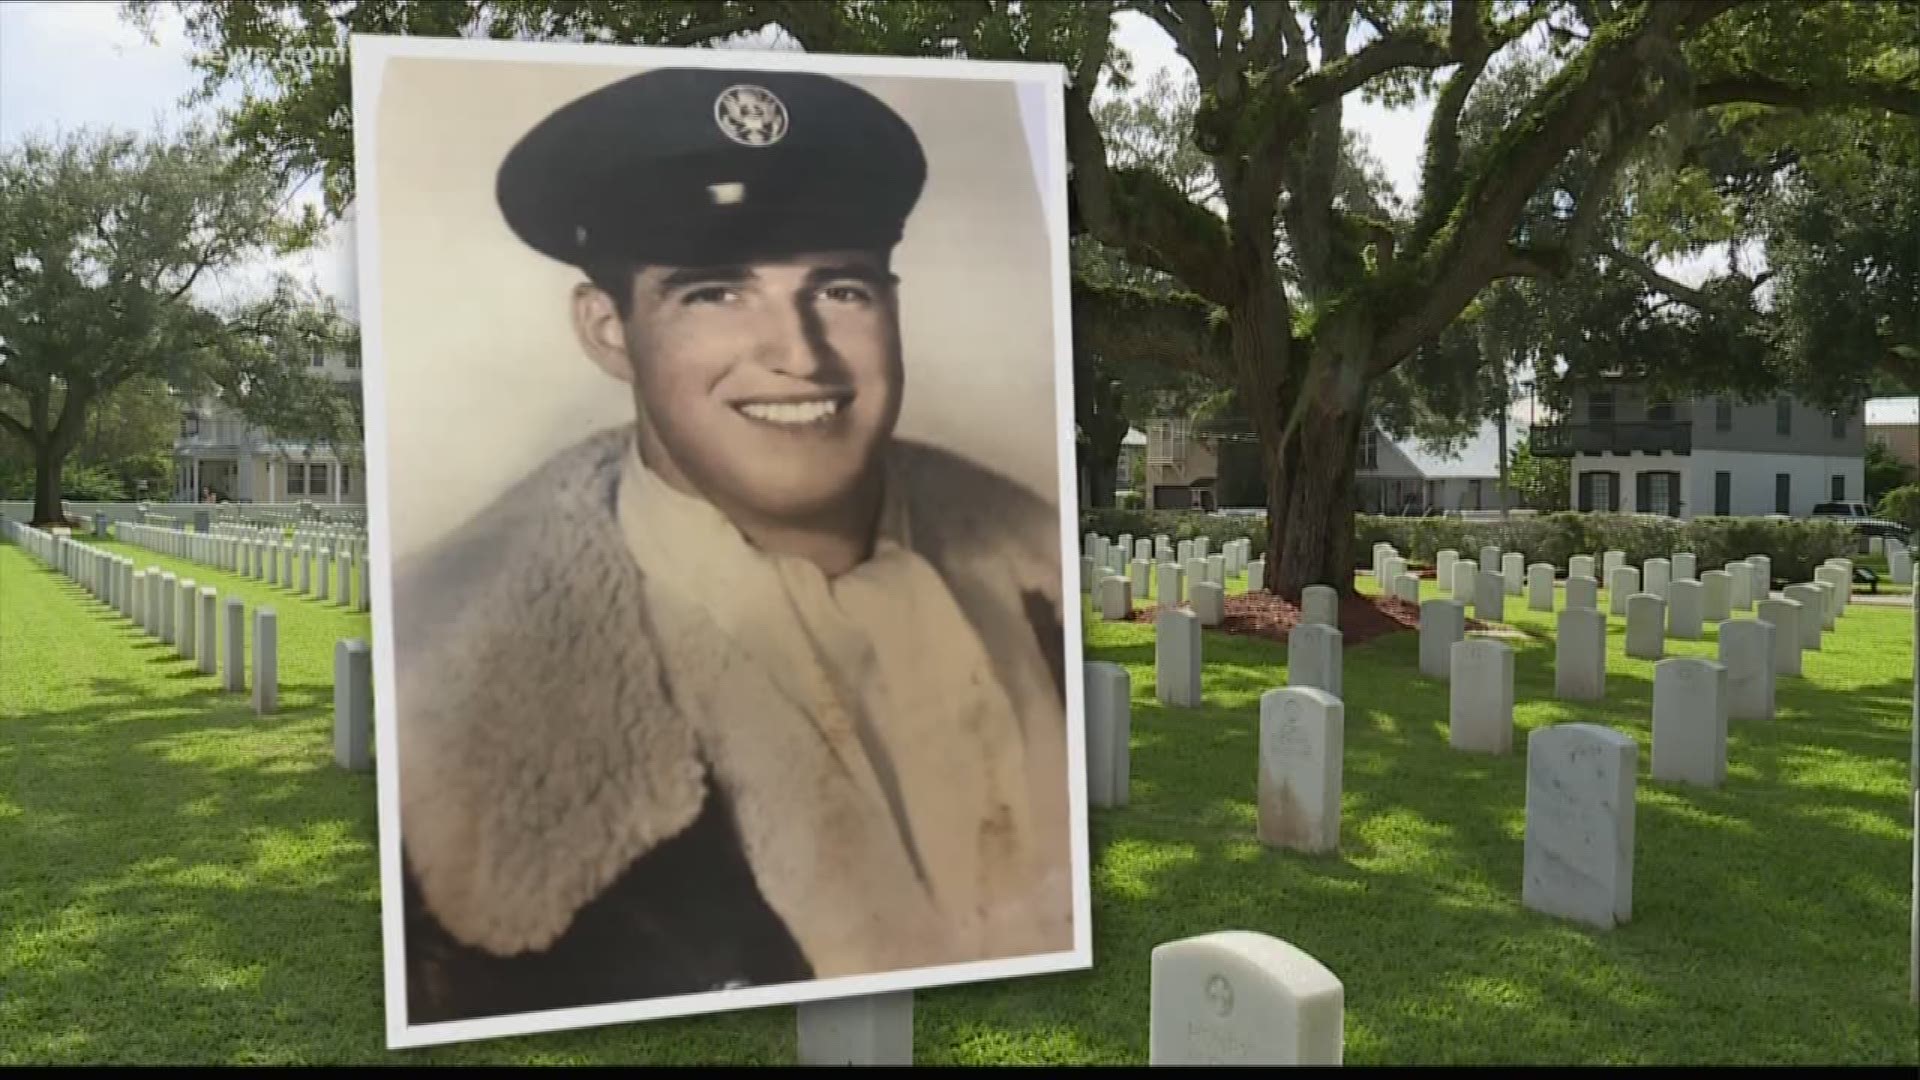 The only condition for any new burial in the St. Augustine National Cemetery is if a family member is already buried there or if another veteran gives up a space.